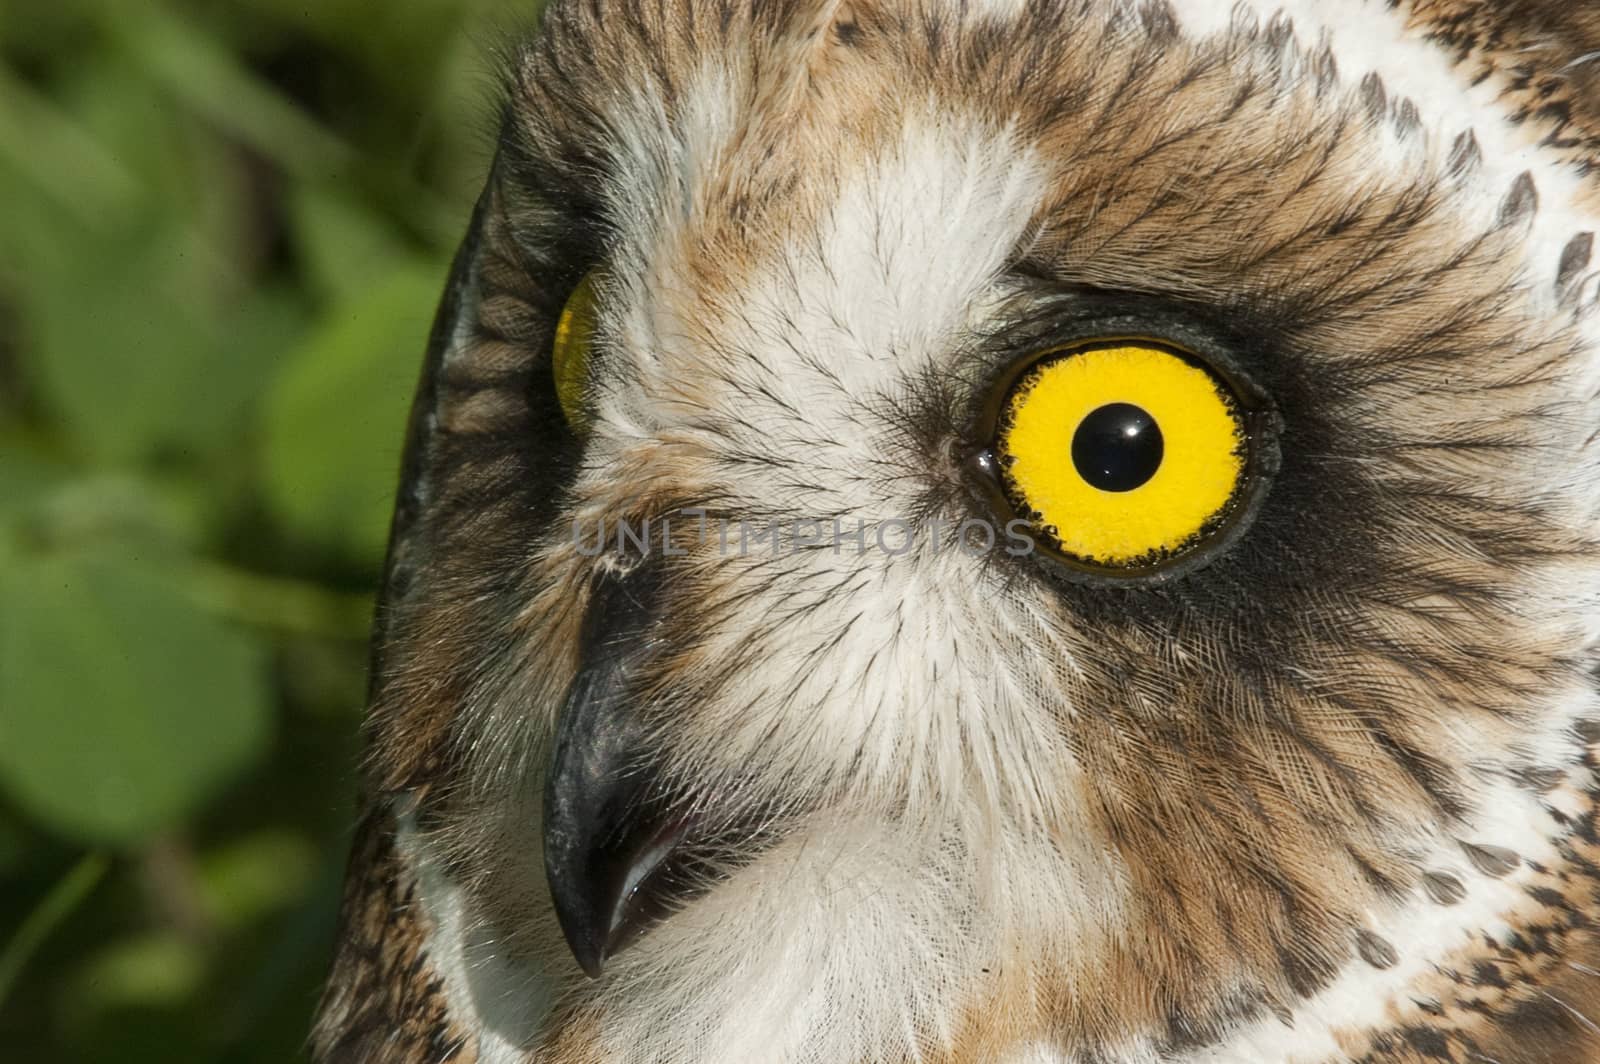 Short eared owl, Asio flammeus, country owl, portrait of eyes and face